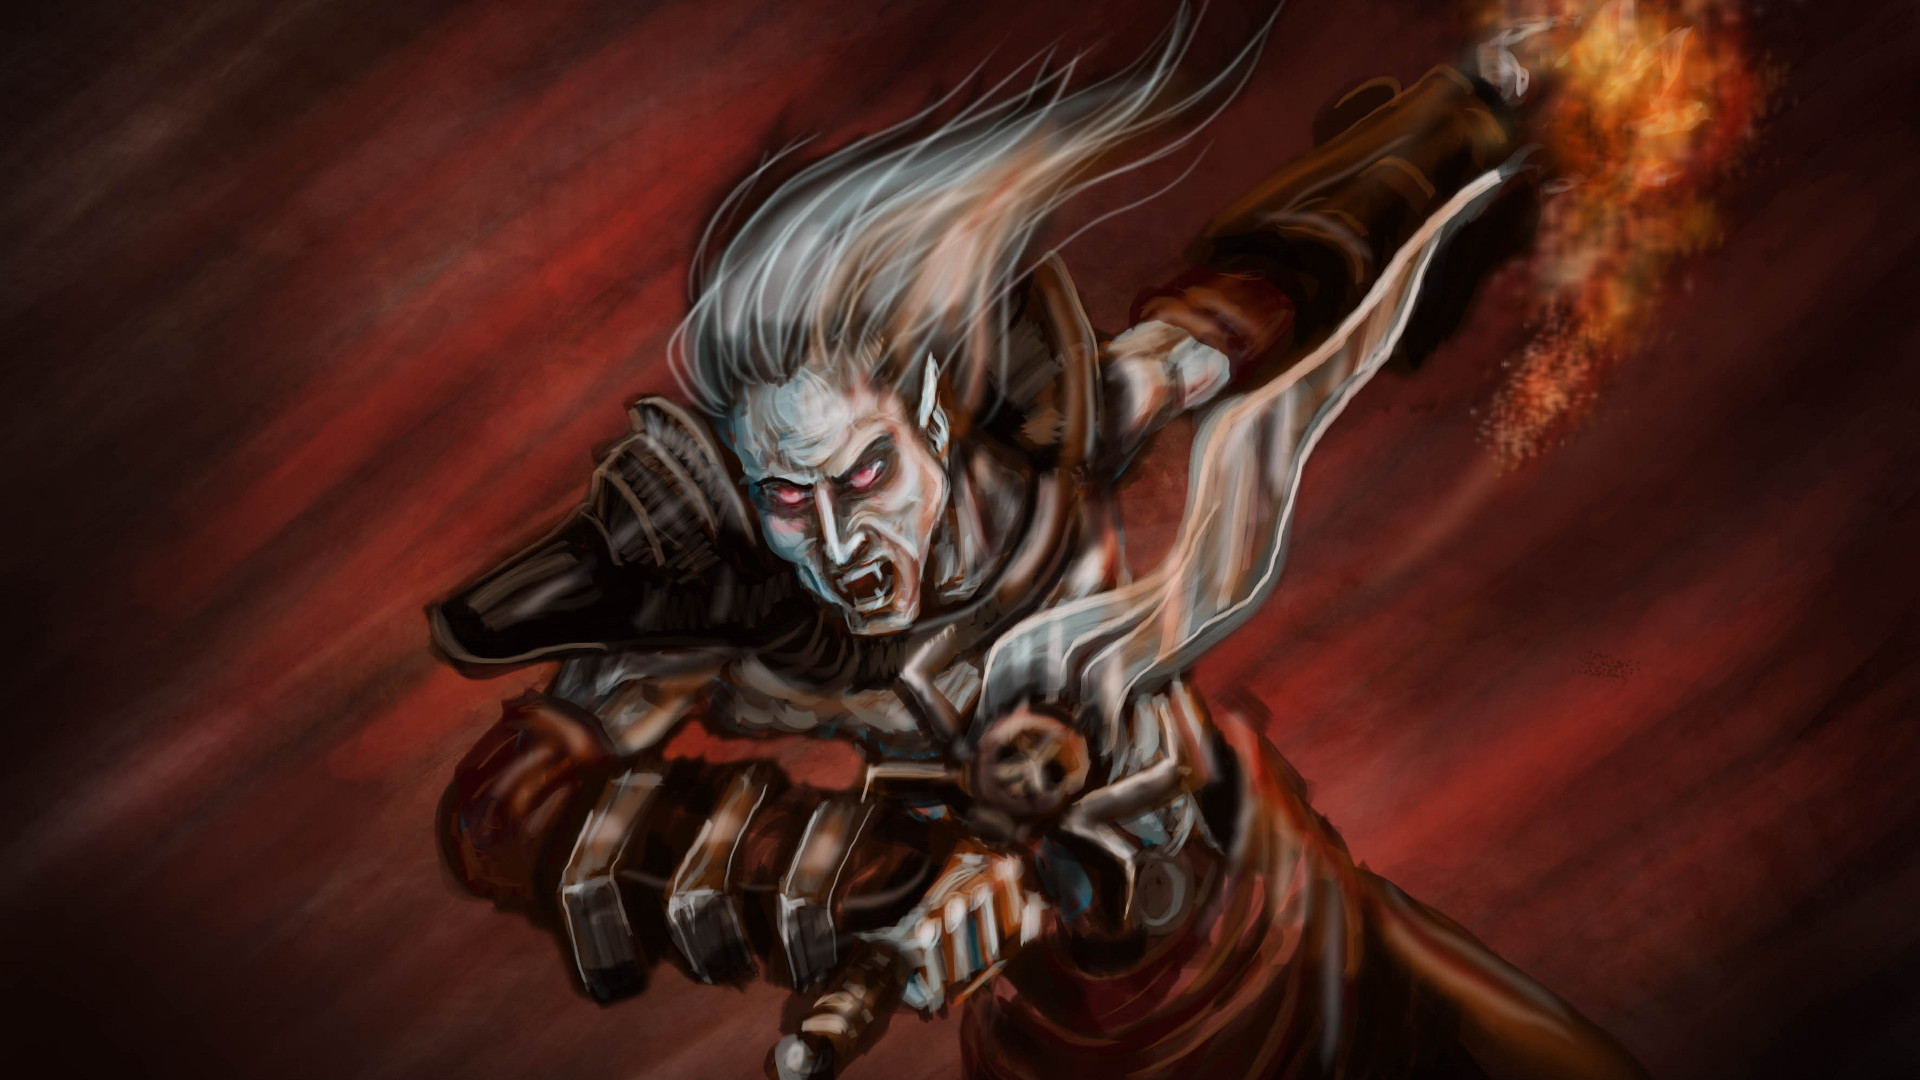 The Legacy of Kain: Blood Omen 2 Details - LaunchBox Games Database